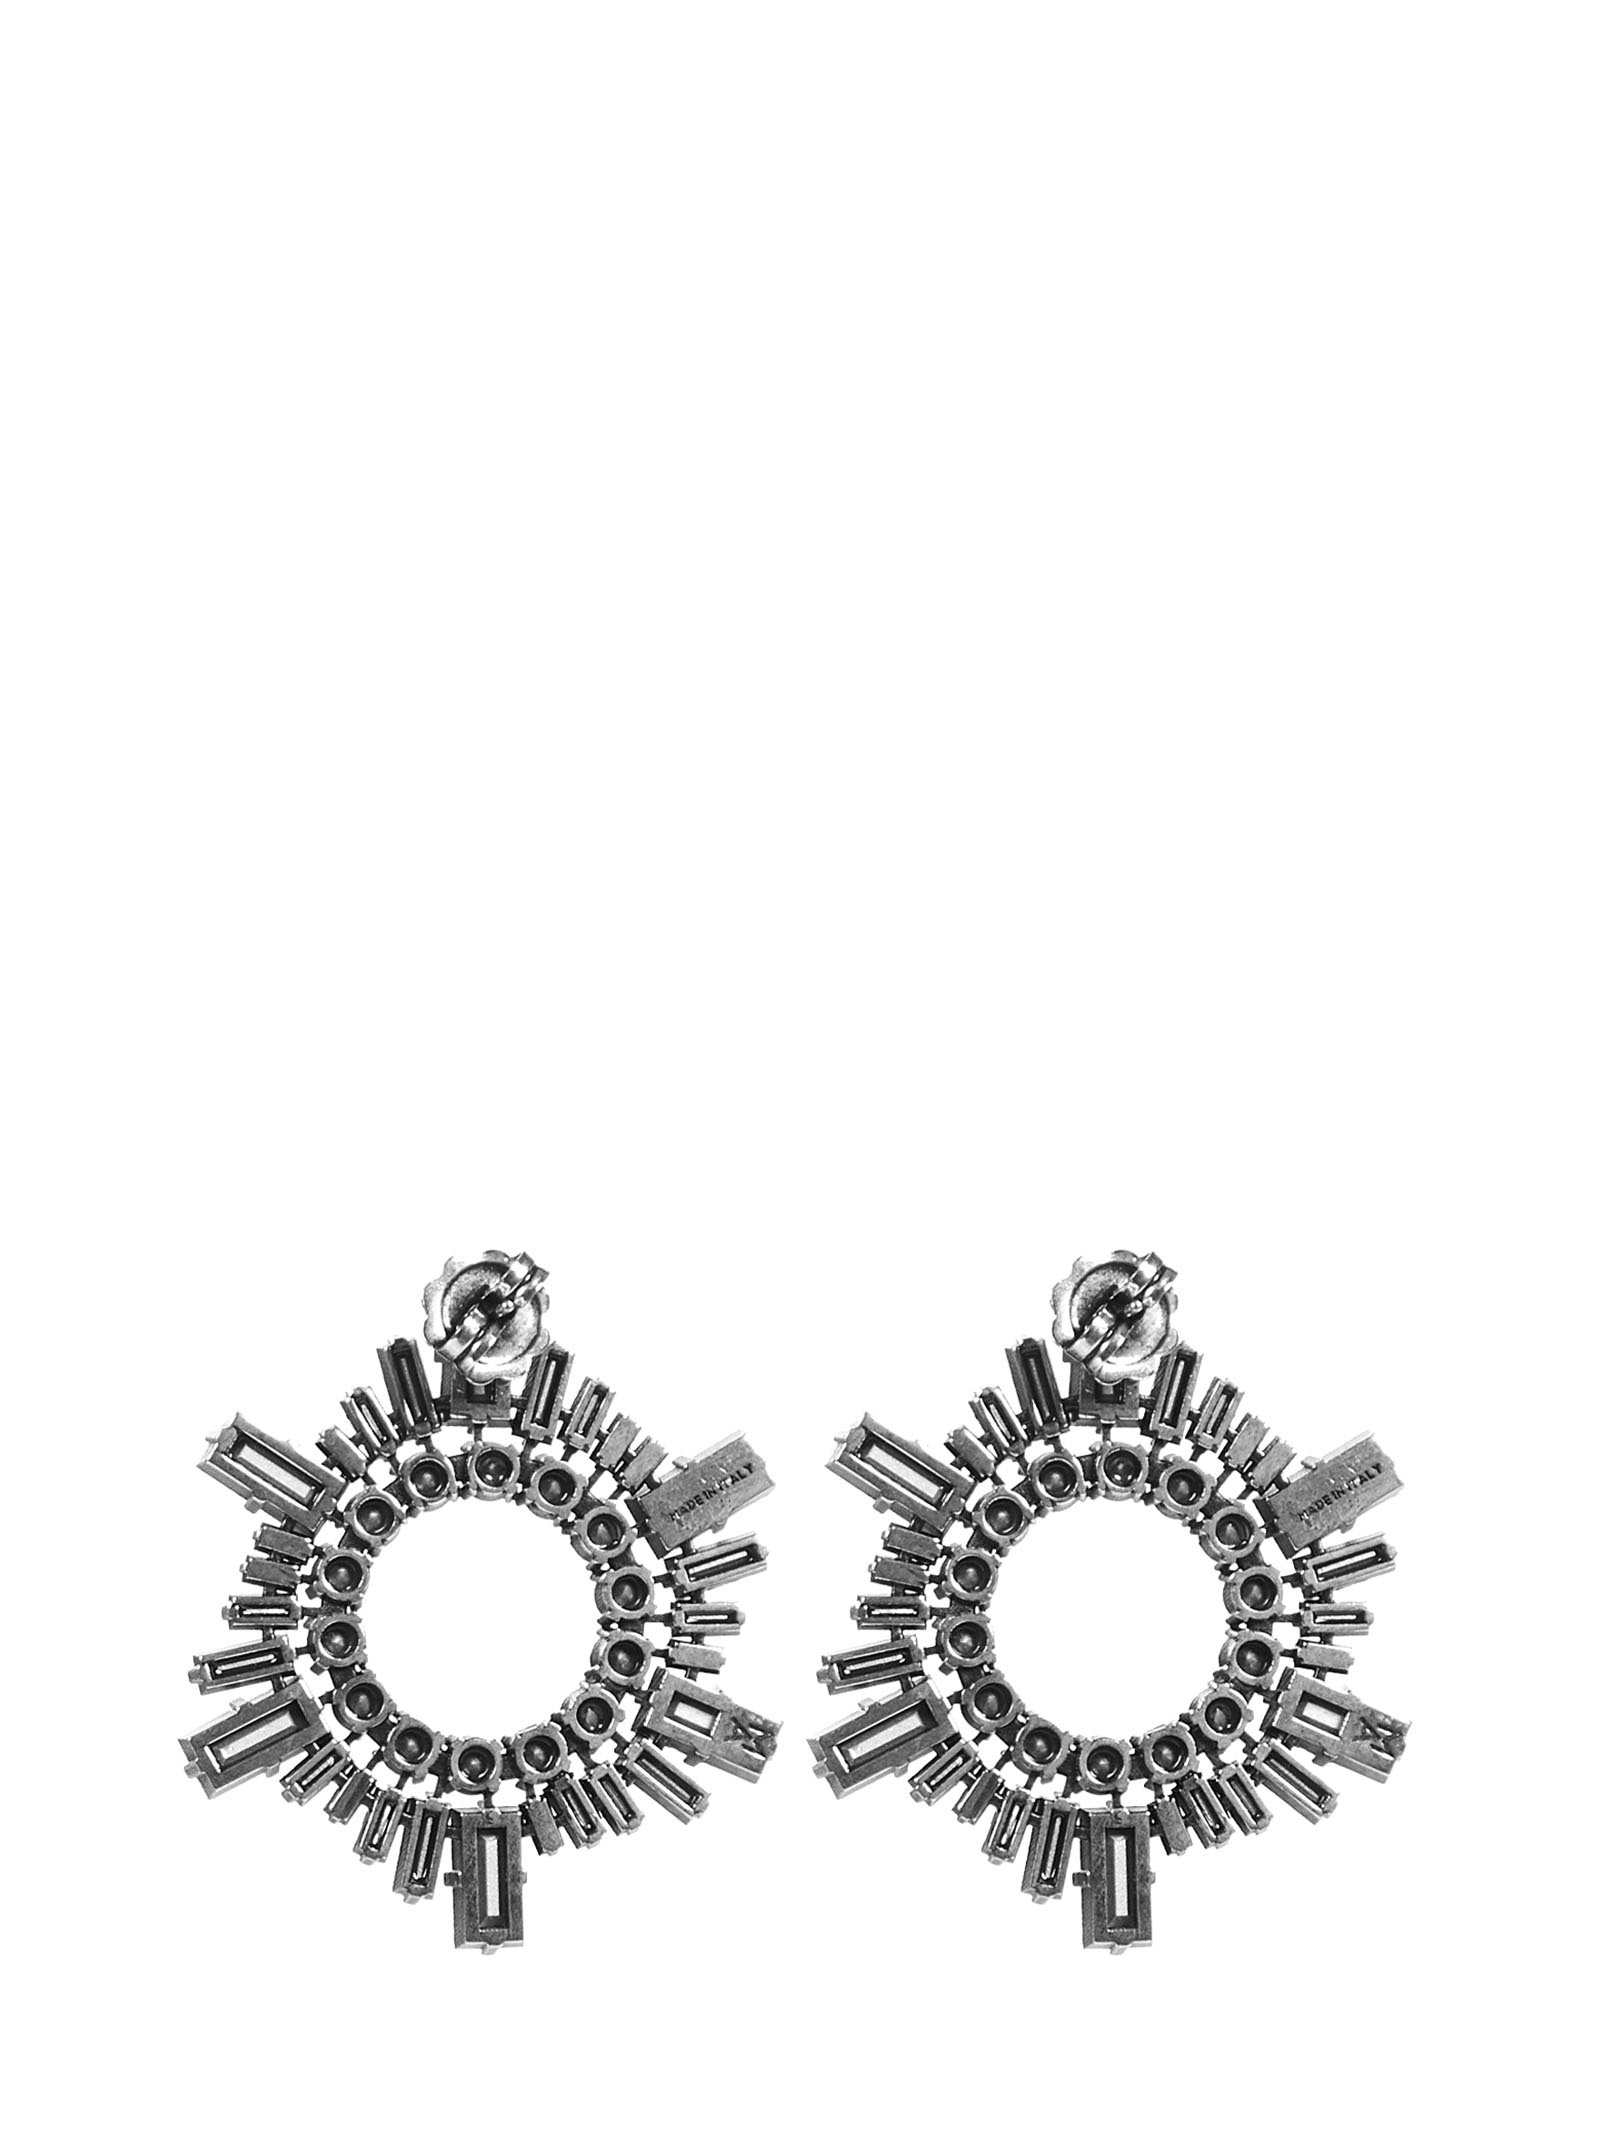 MINI BEGUM silver brass earrings with black crystals set. - 2